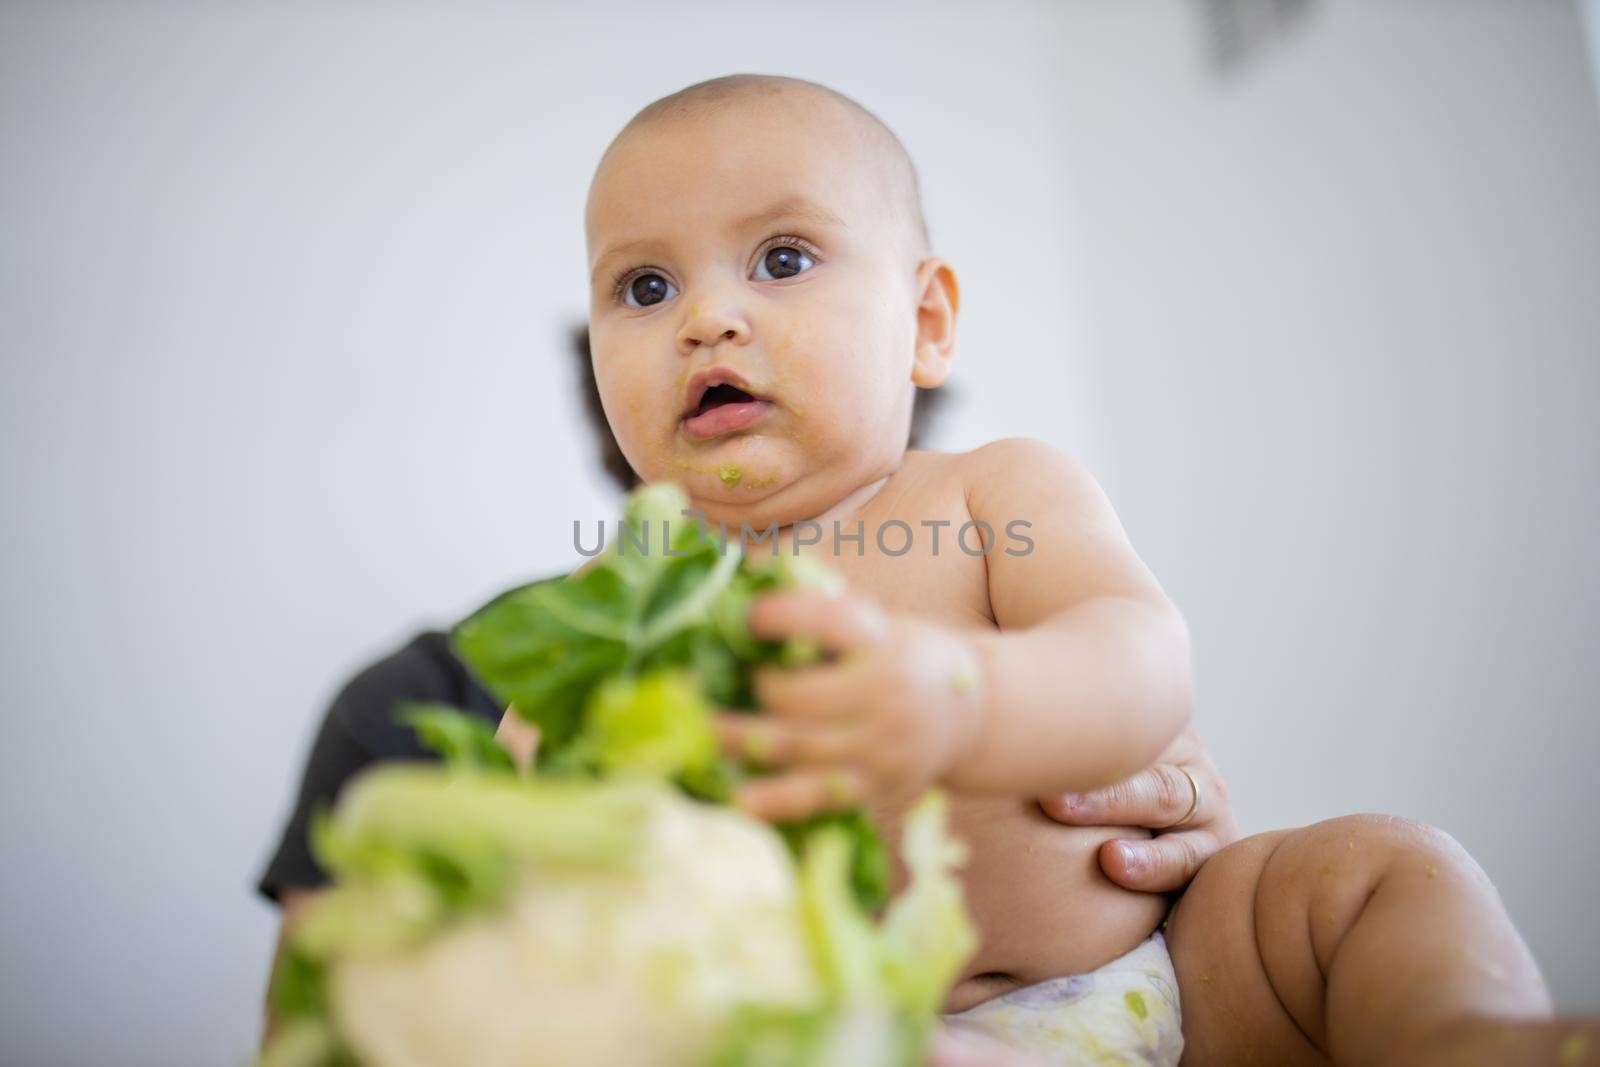 Adorable and surprised-looking baby on table holding cauliflower. Father lovingly holding his baby daughter above table. Babies interacting with food